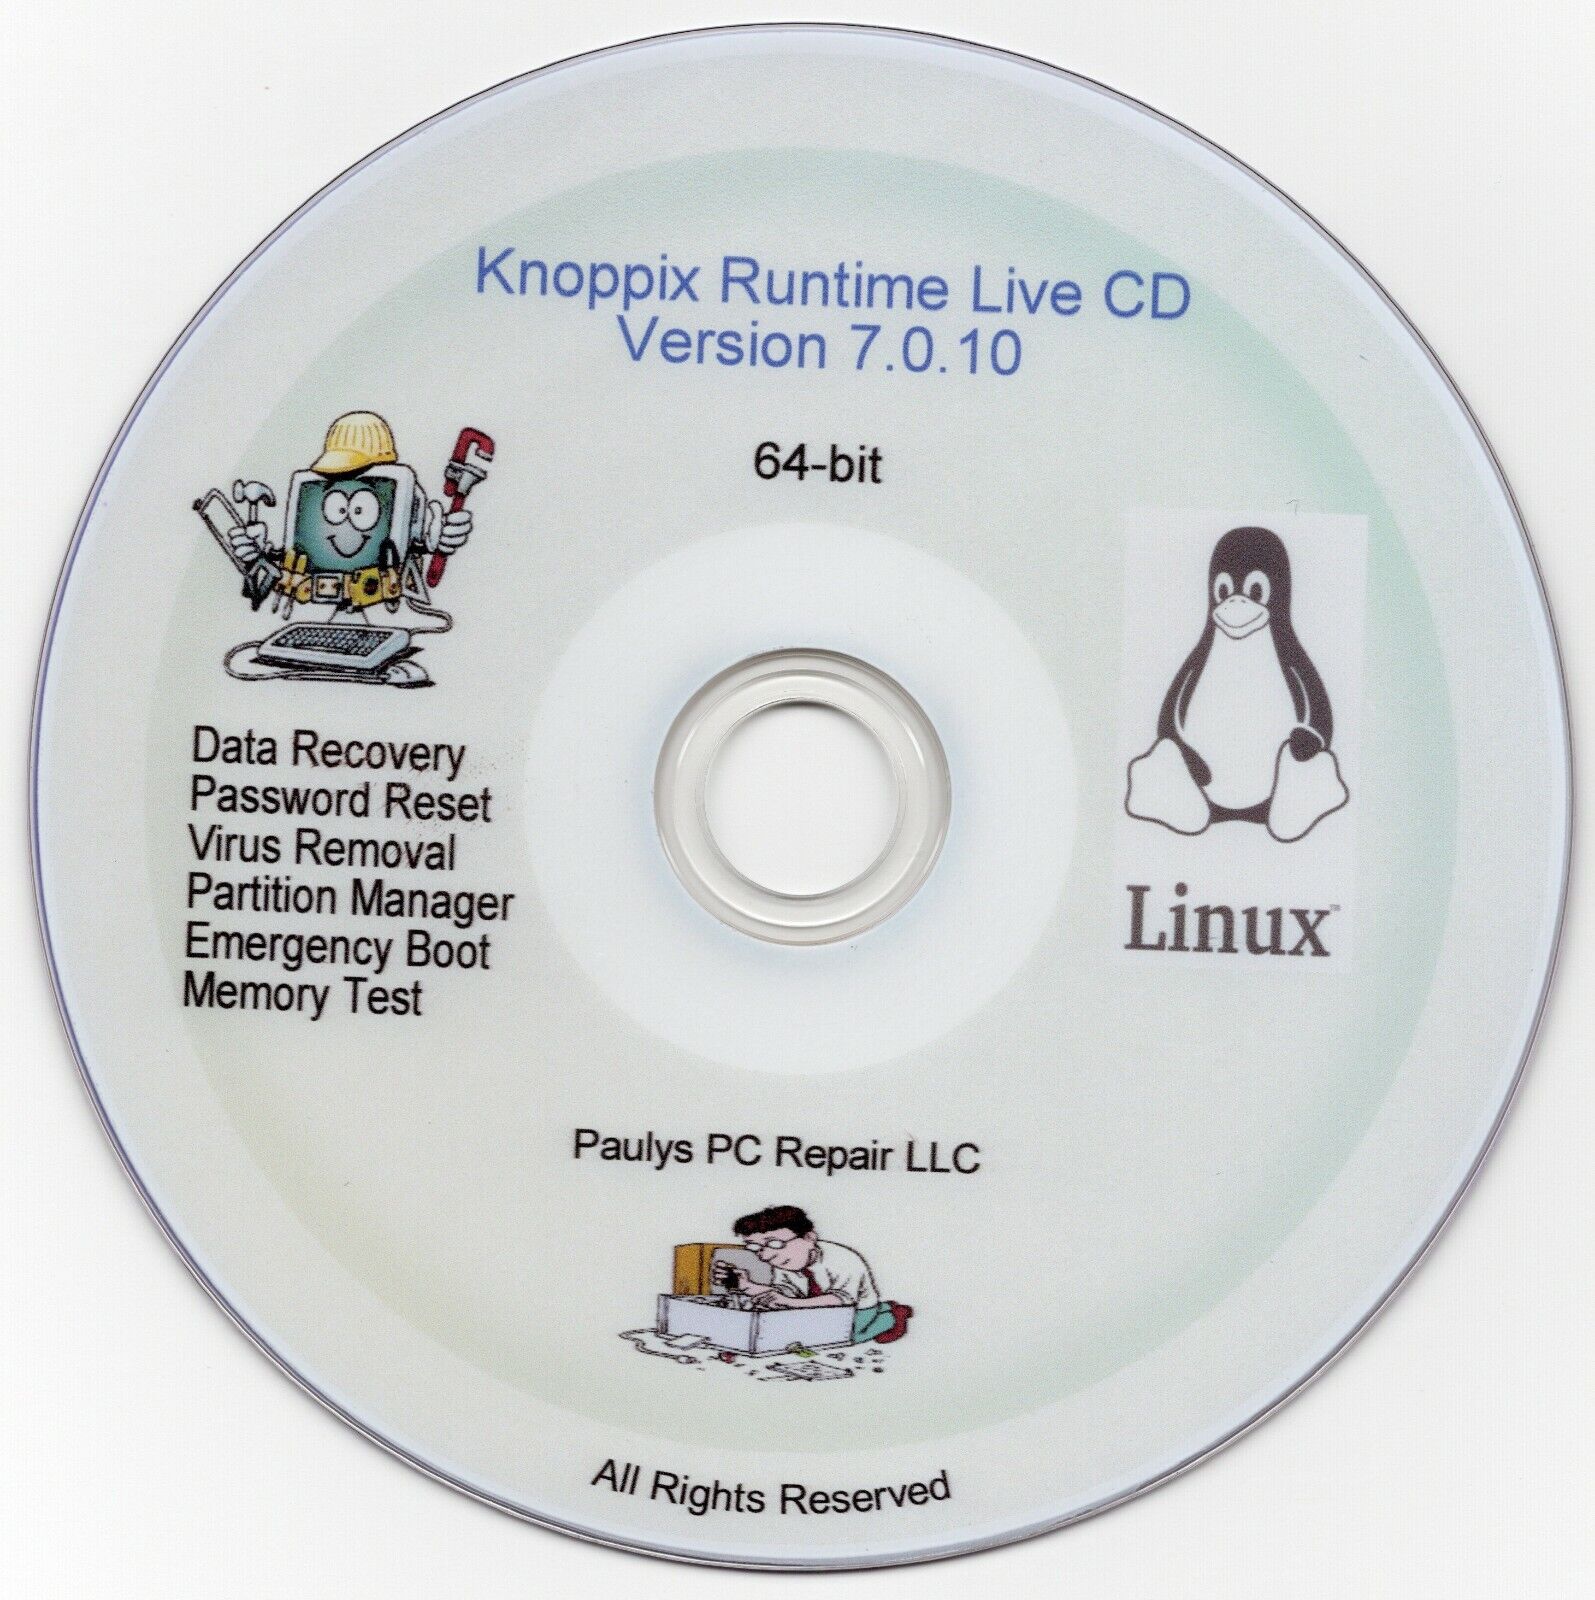 Restore Rescue Format Fix Boot CD Knoppix-Based Runtime Live CD Version 7.0.10